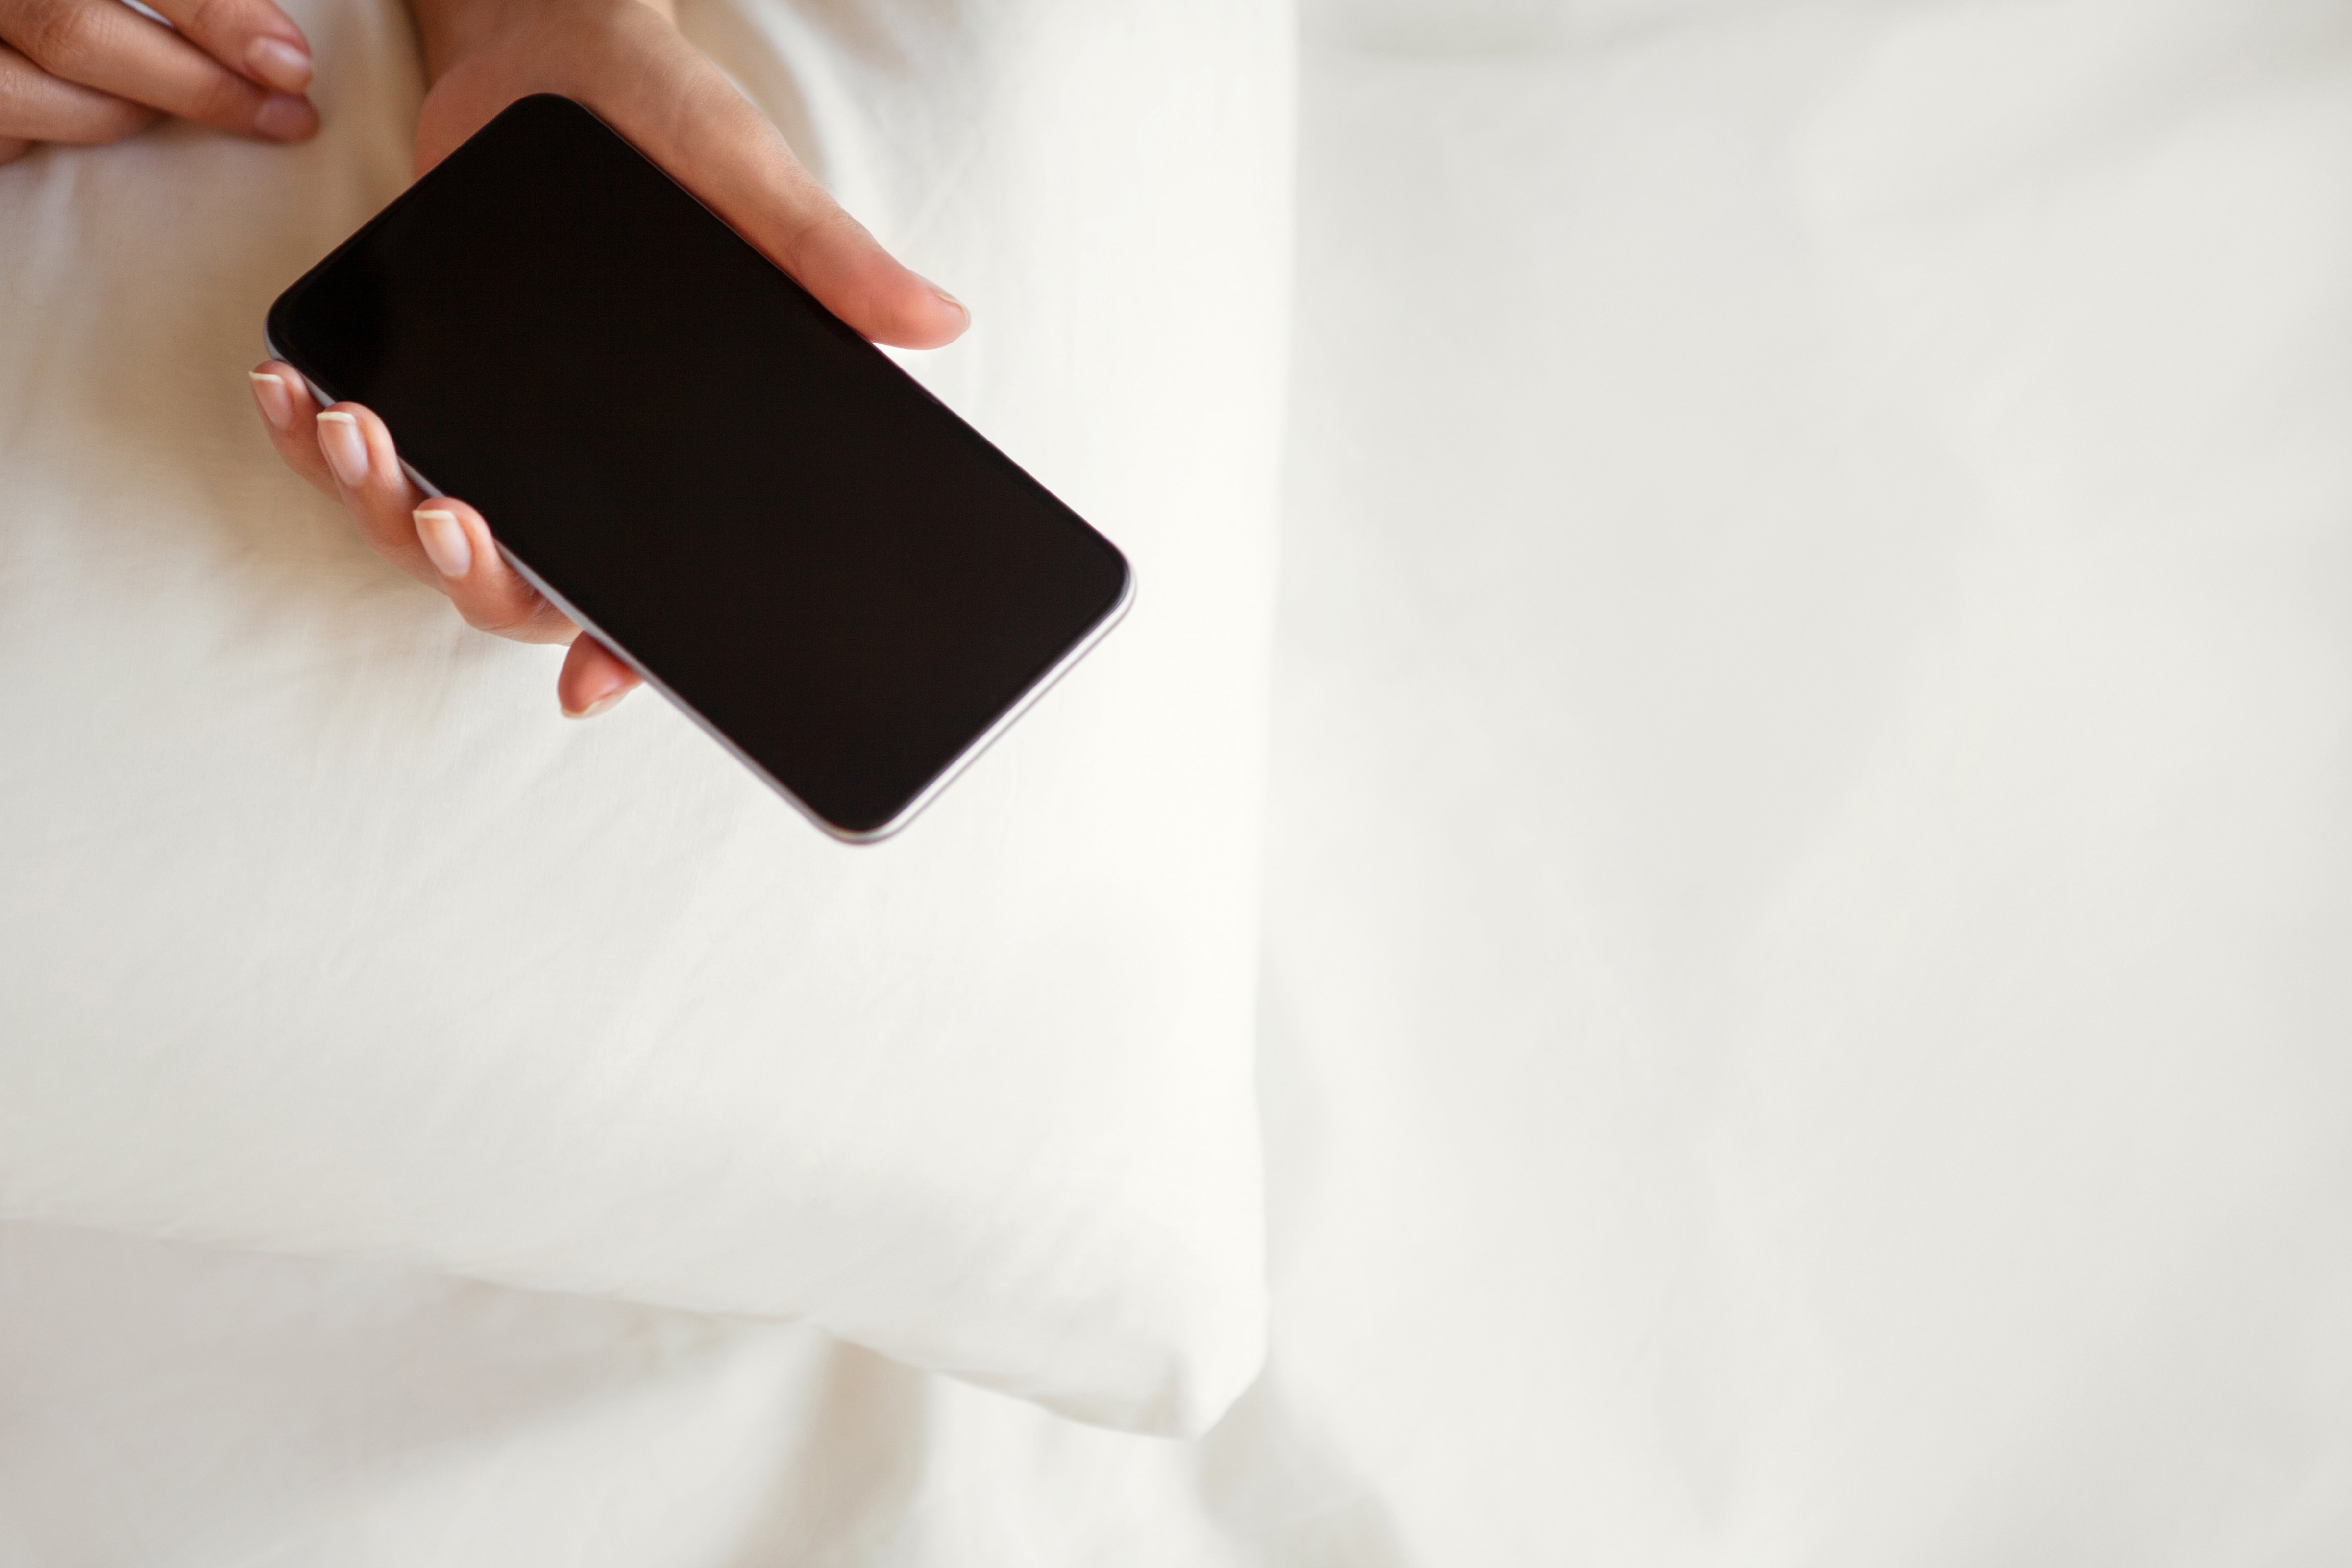 Woman using smartphone in bed (Erik Khalitov—Getty Images/iStockphoto)